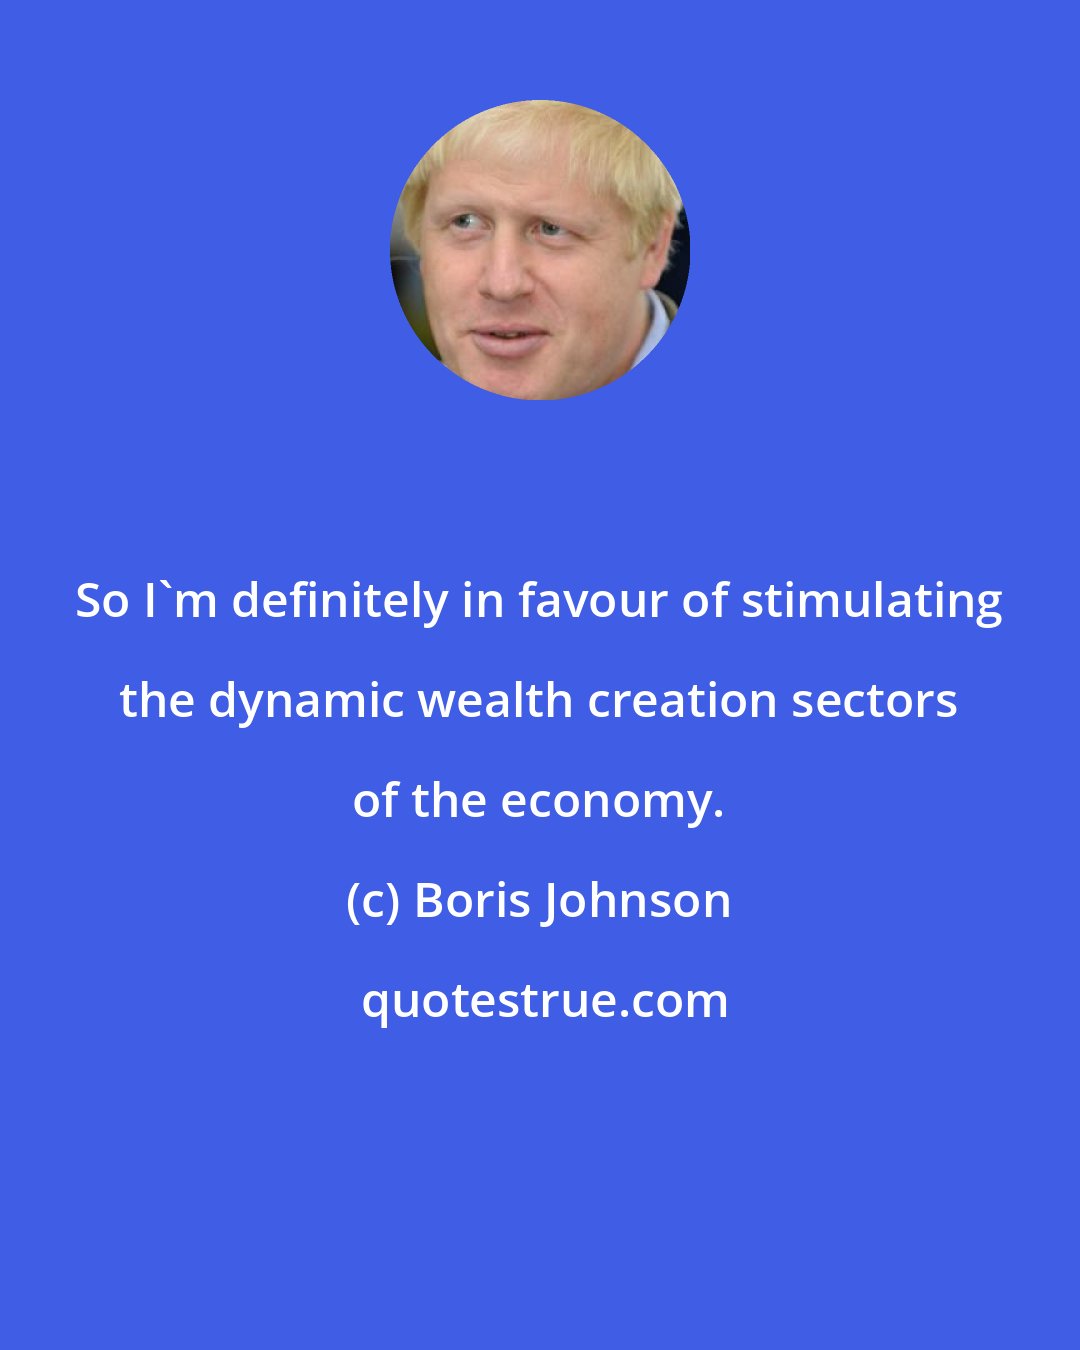 Boris Johnson: So I'm definitely in favour of stimulating the dynamic wealth creation sectors of the economy.